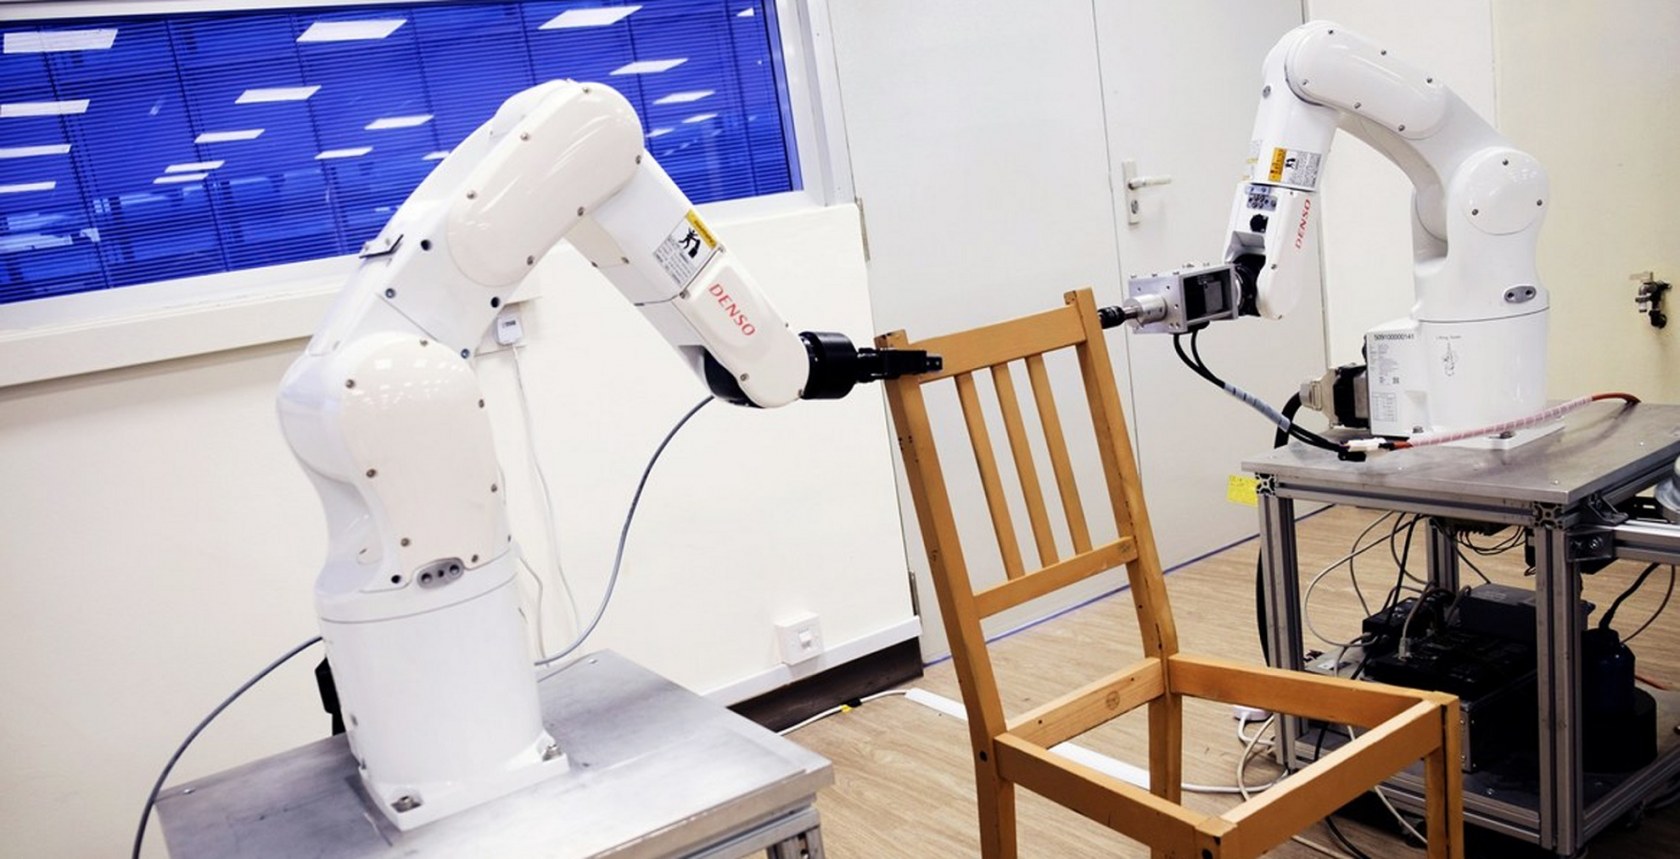 Robot assembles Ikea furniture without losing its temper or any pieces